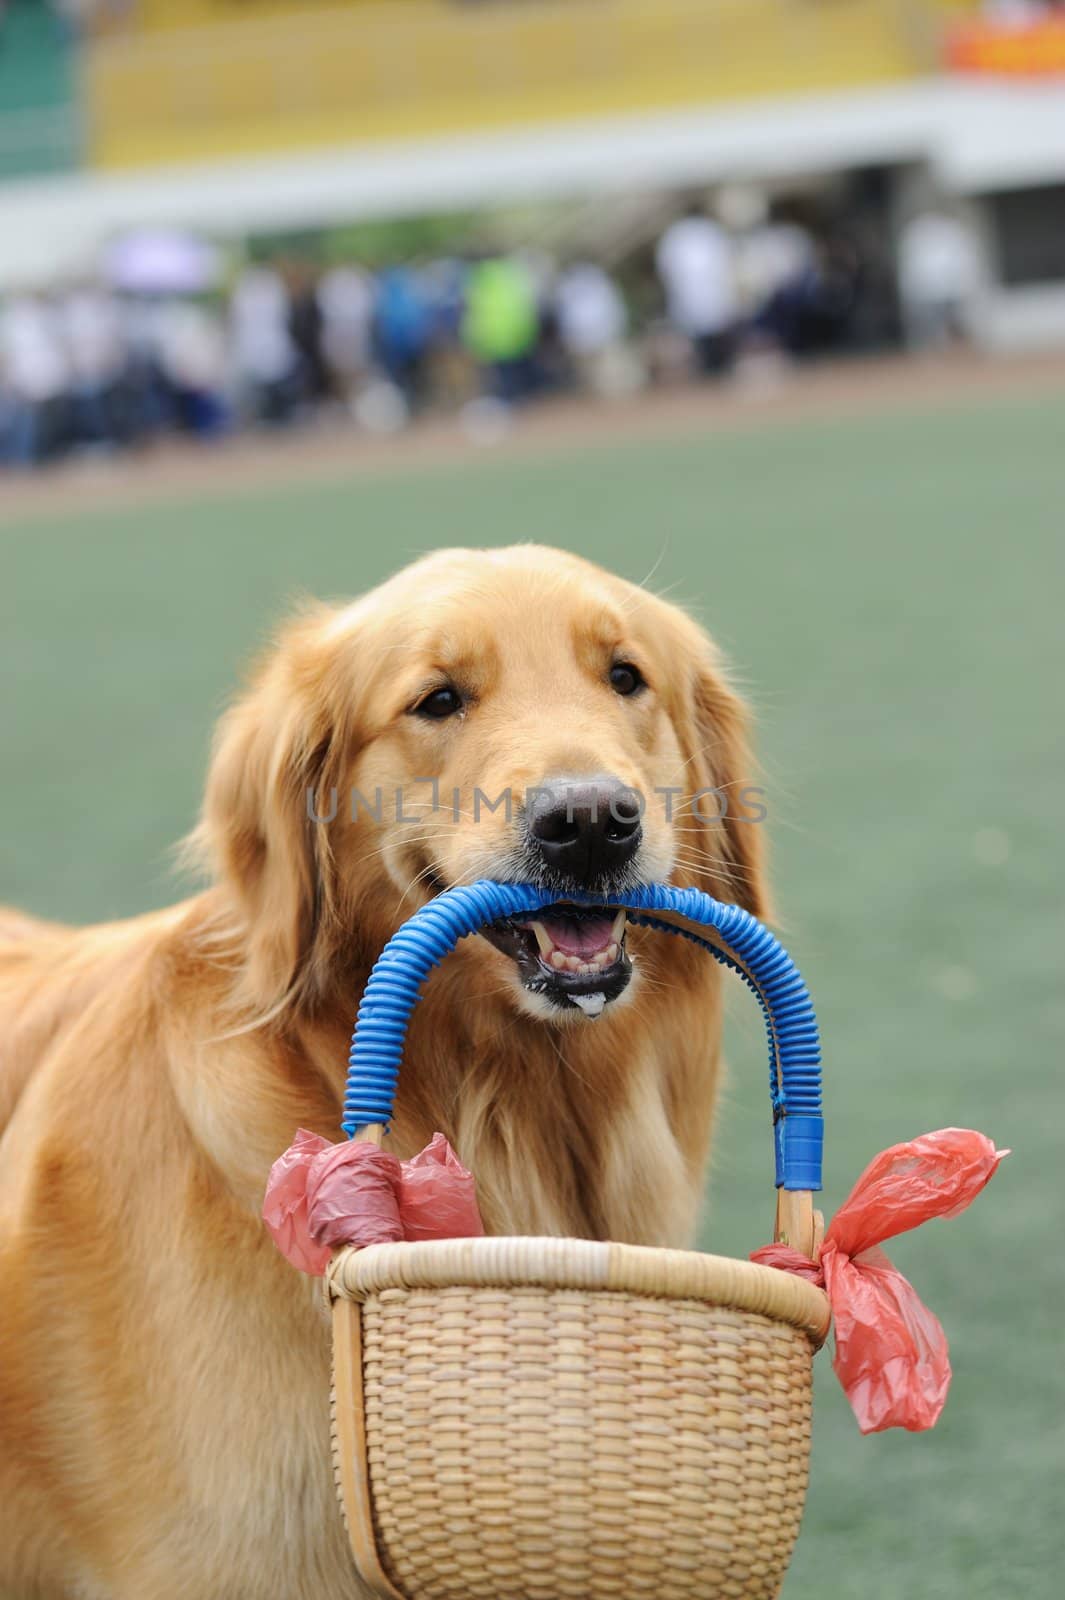 Golden retriever dog holding a basket in its mouth